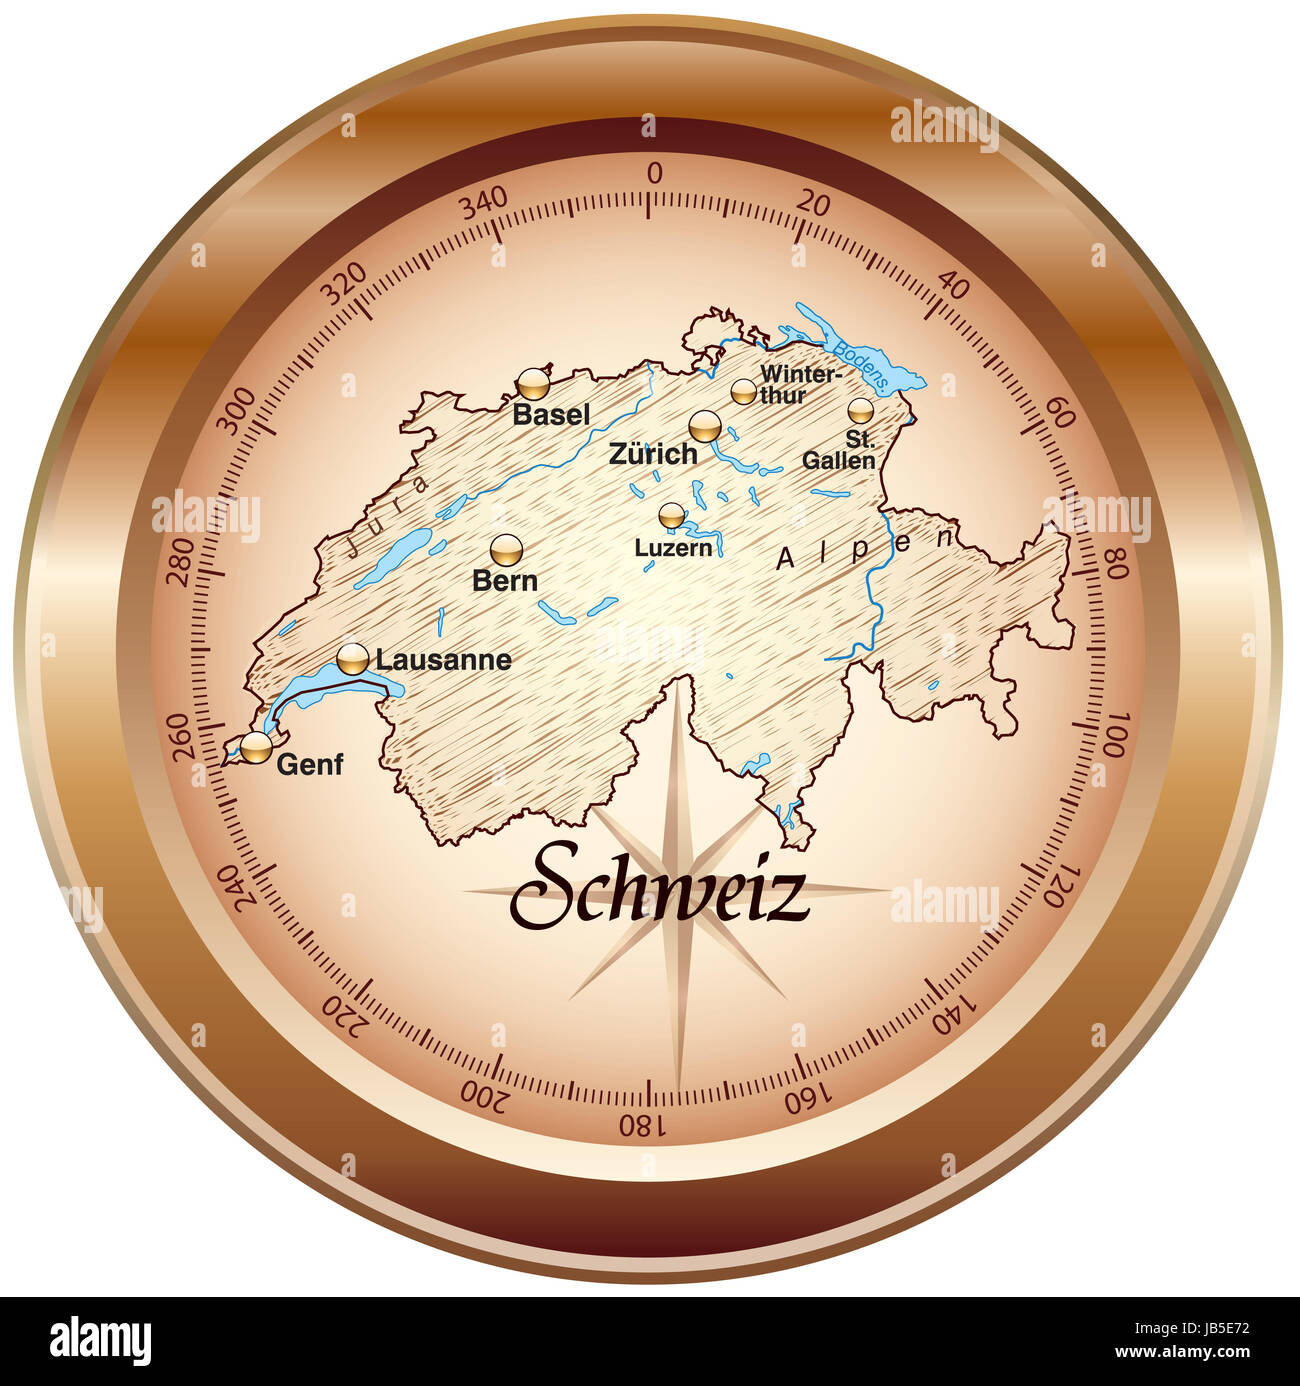 Page 2 - Schweiz Karte High Resolution Stock Photography and Images - Alamy